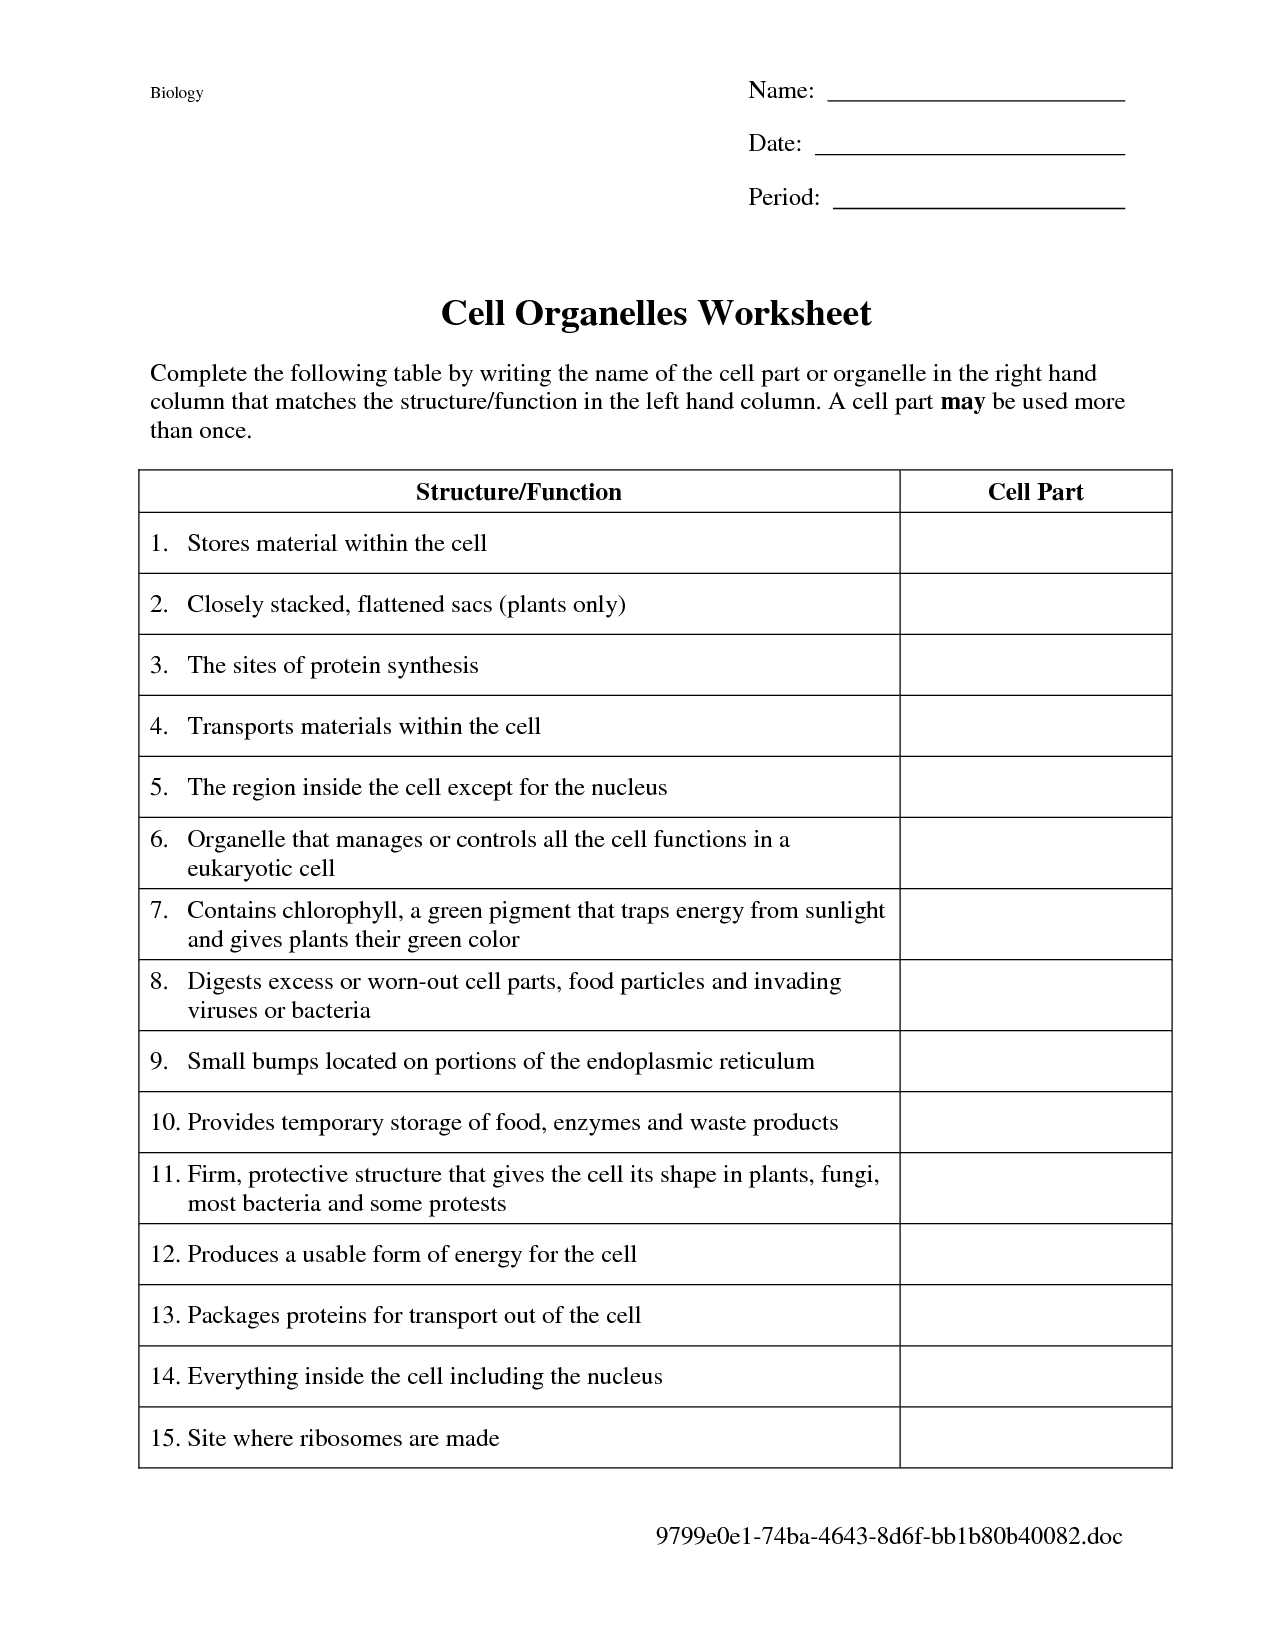 Bill Nye Energy Worksheet Answers as Well as Matter and Energy Worksheets Kidz Activities